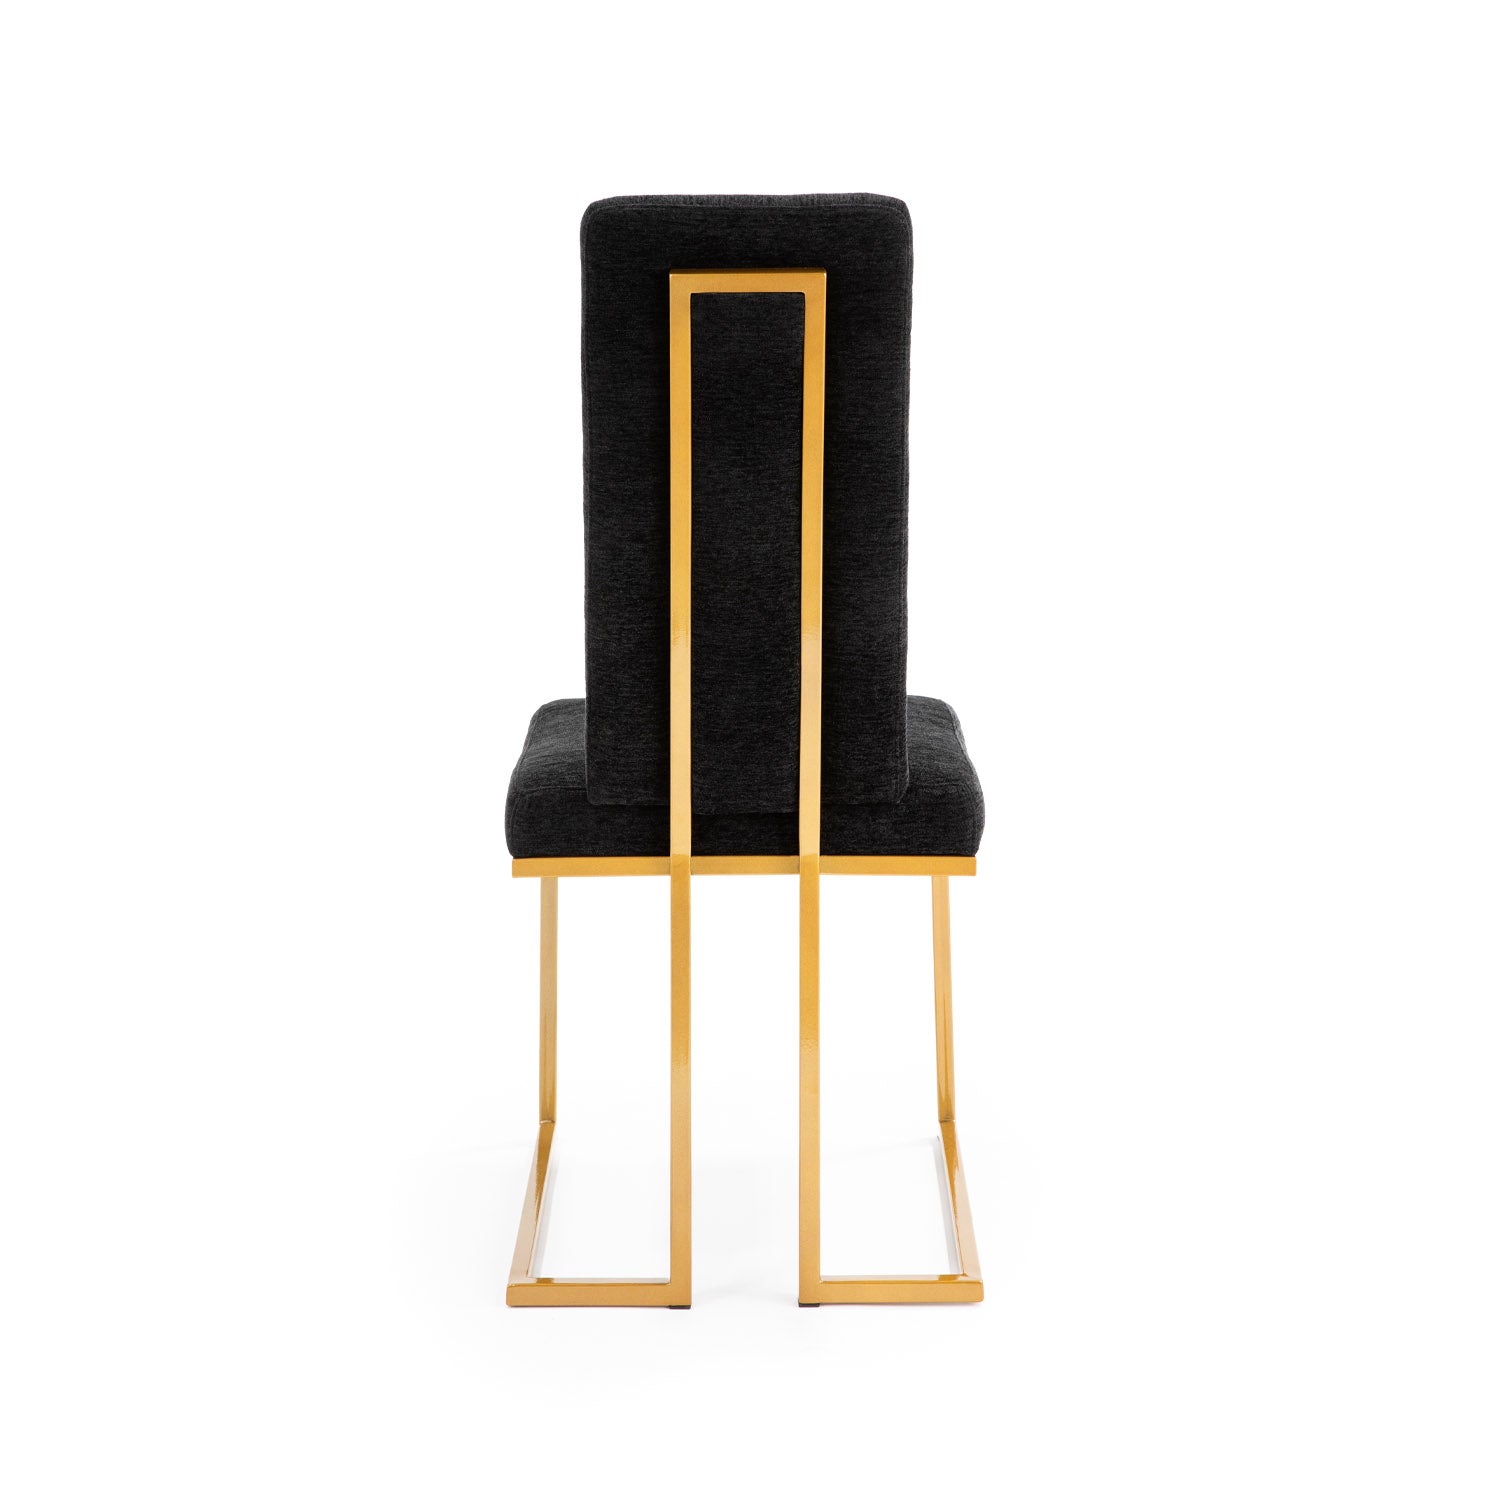 Wesley Allen Brentwood Chair in Mid Black Fabric and Sheen Gold Finish. Back View.